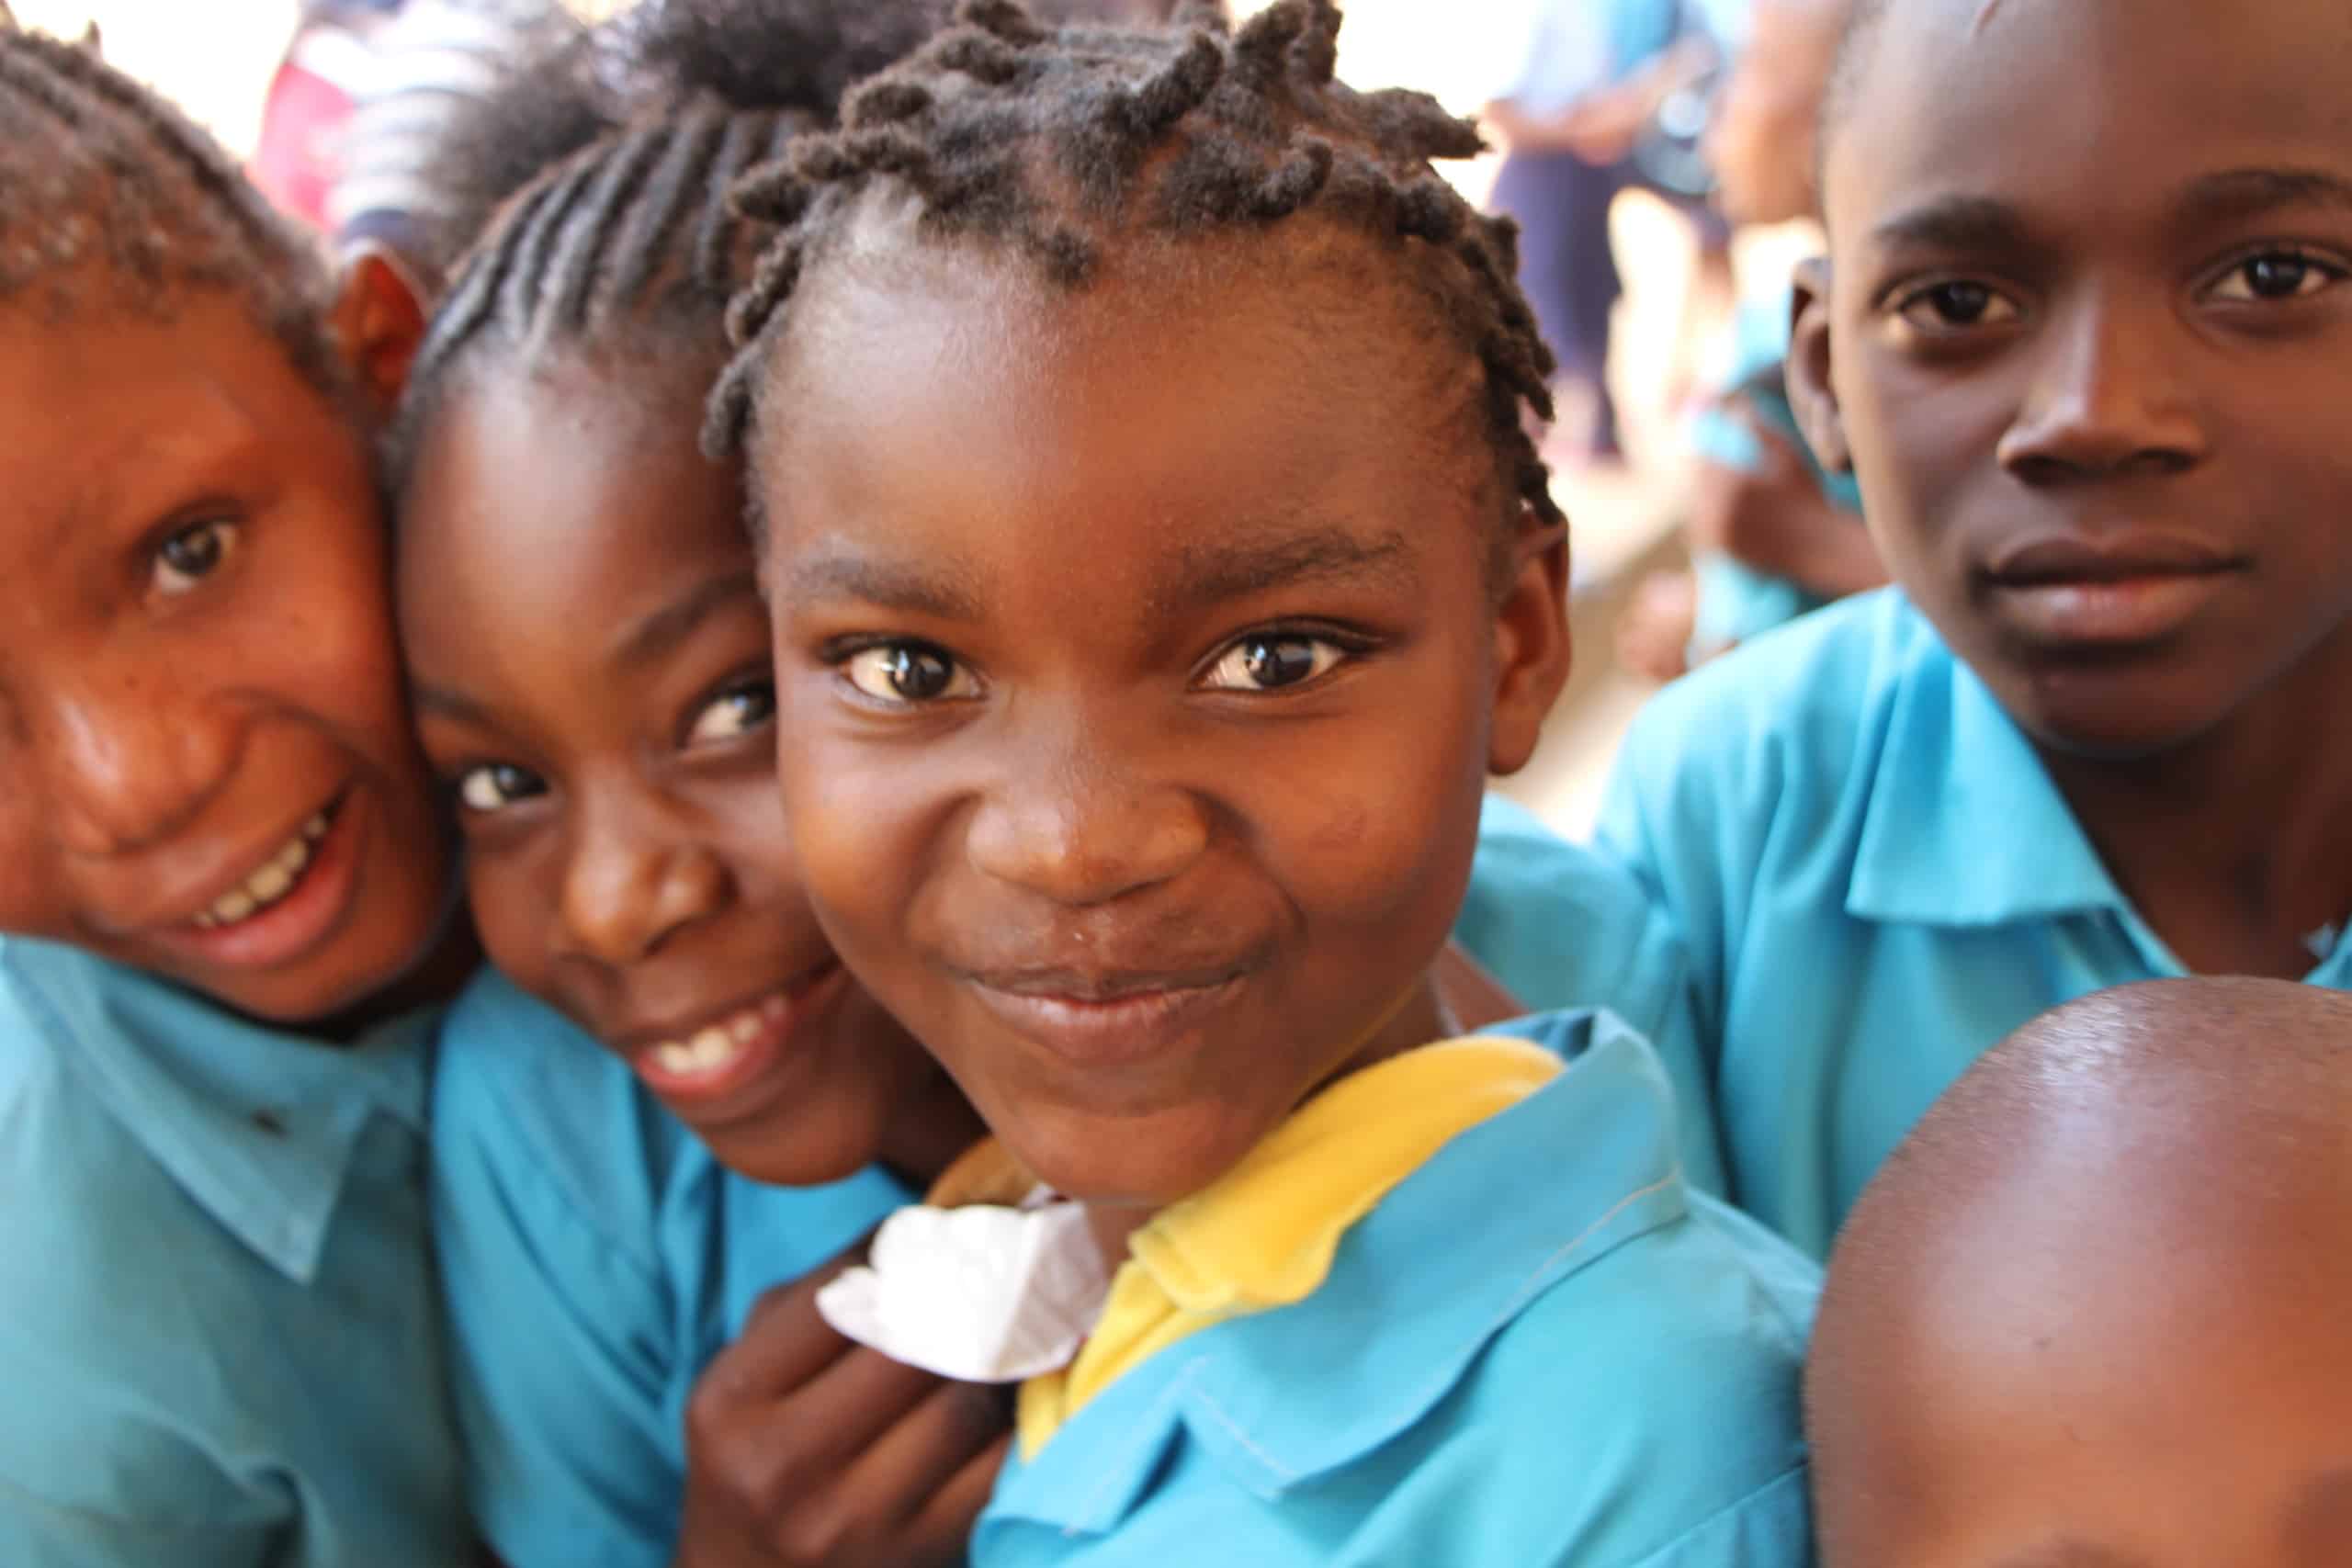 World Education Awarded Program to Expand Bilingual Education in Mozambique